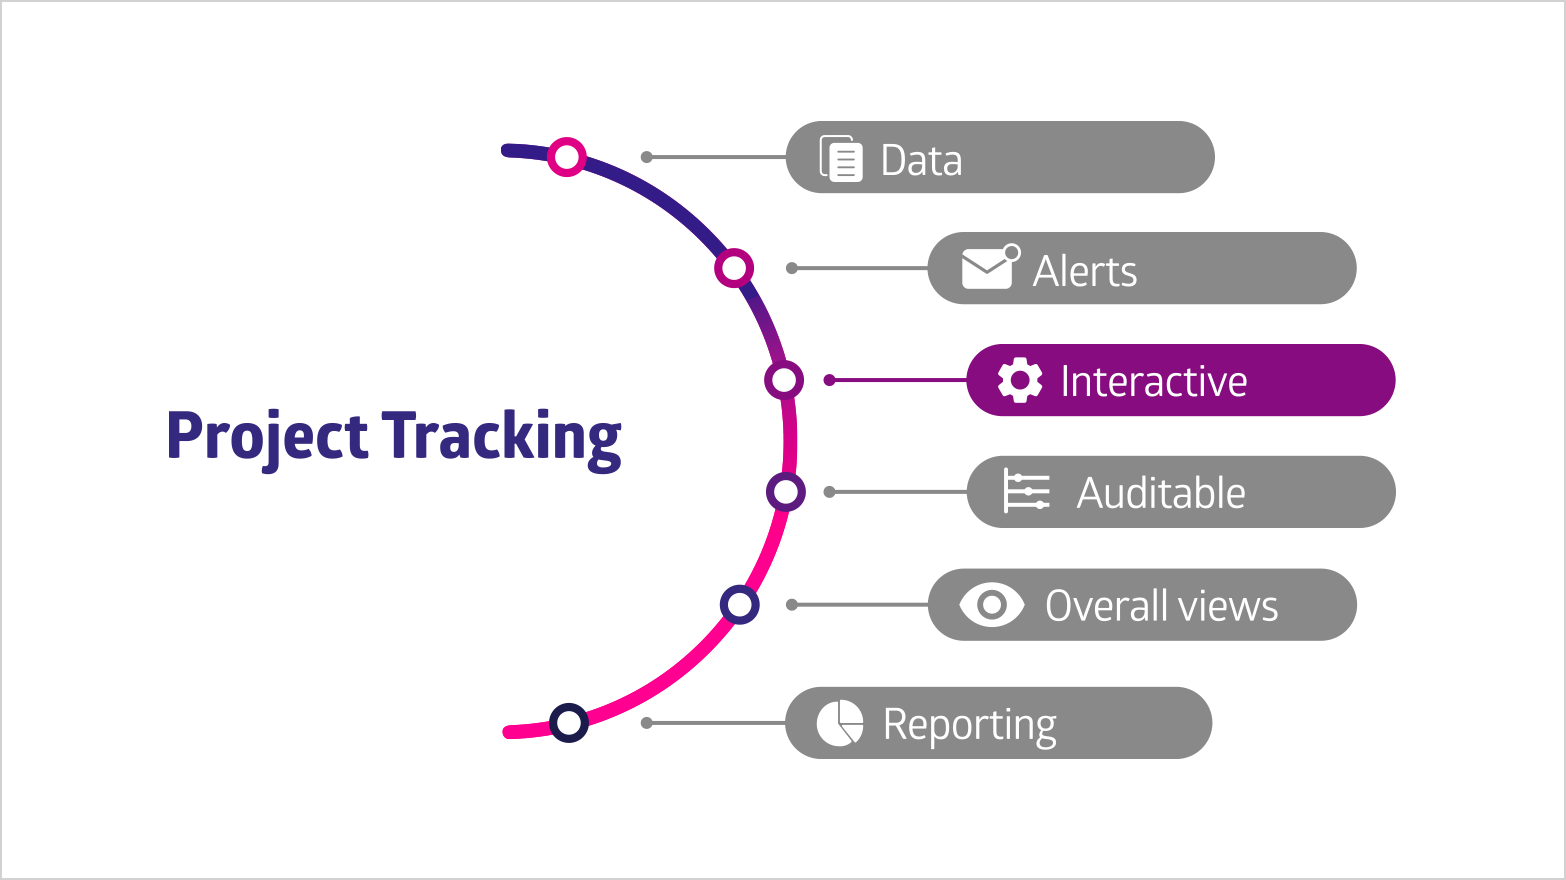 Learn why project tracking software should be interactive according the Project Tracking Bow